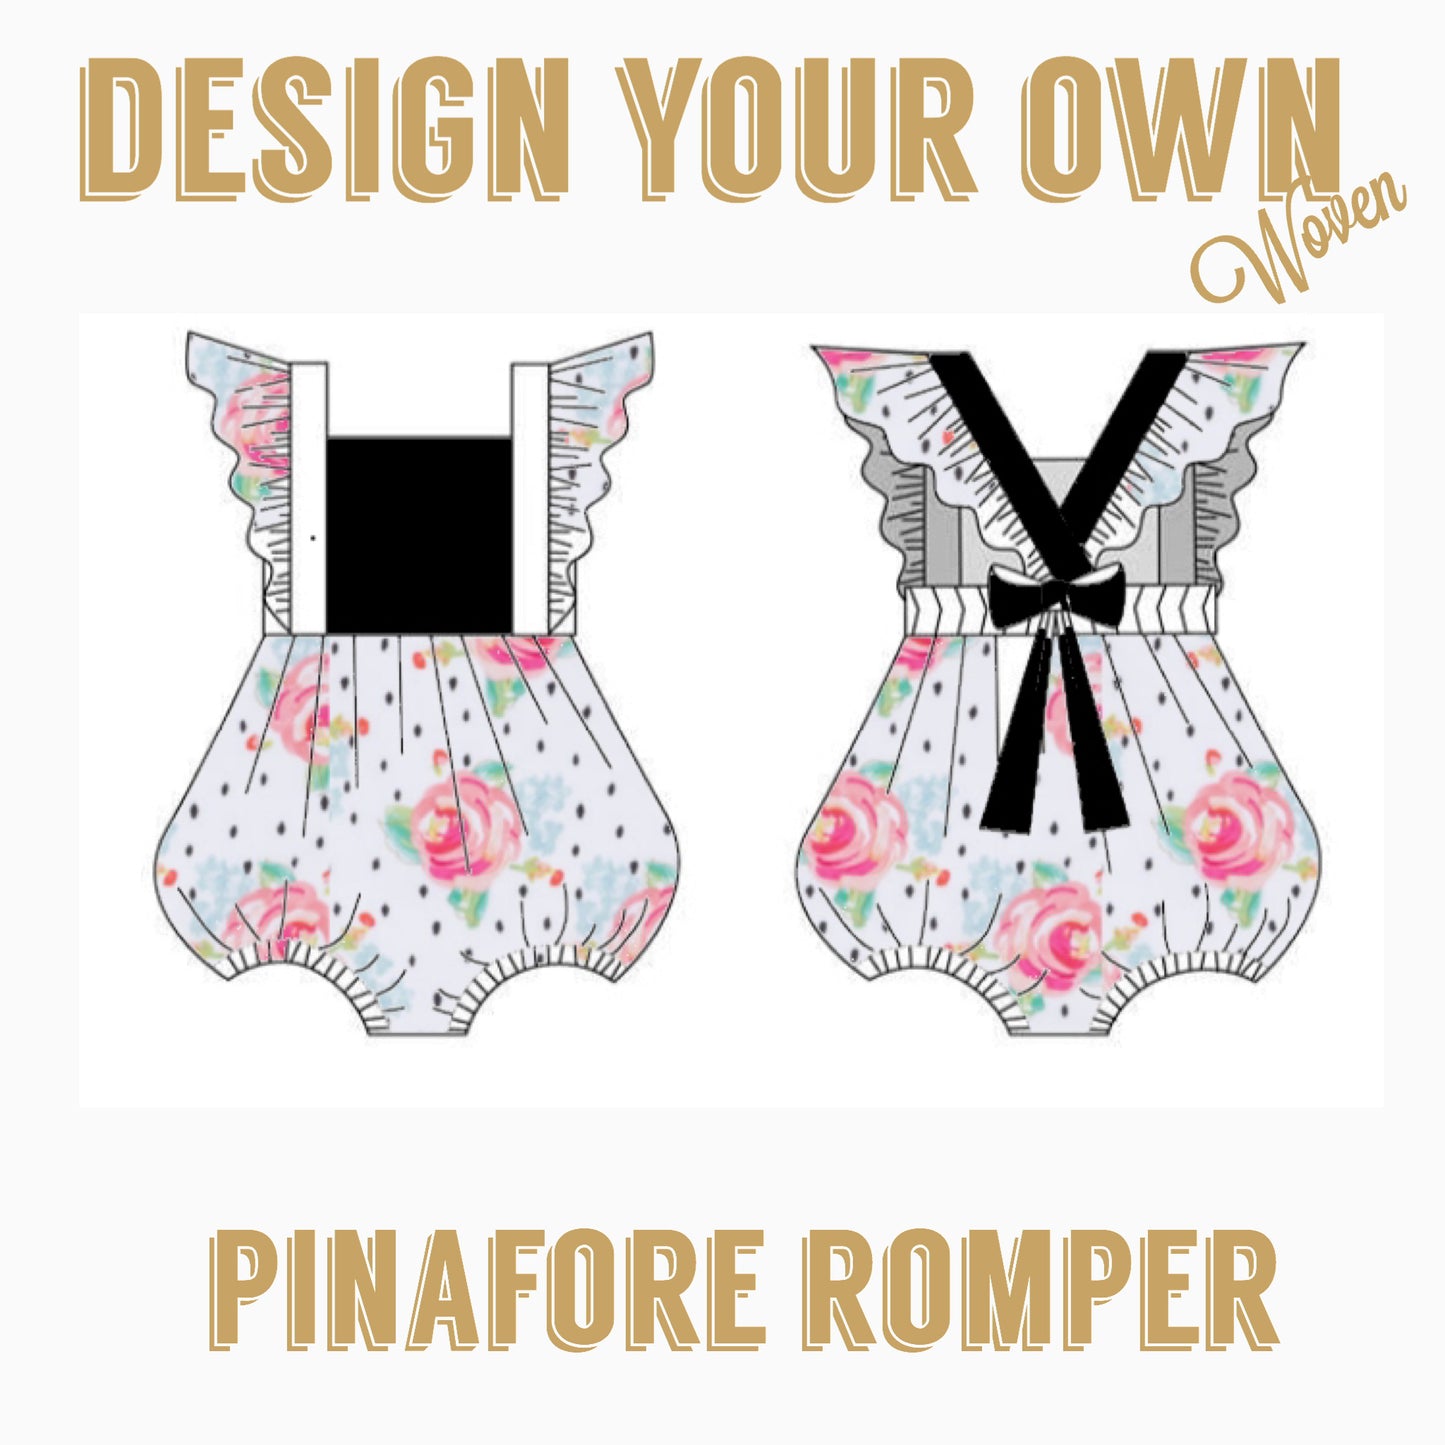 DESIGN YOUR OWN | WOVEN PINAFORE ROMPER